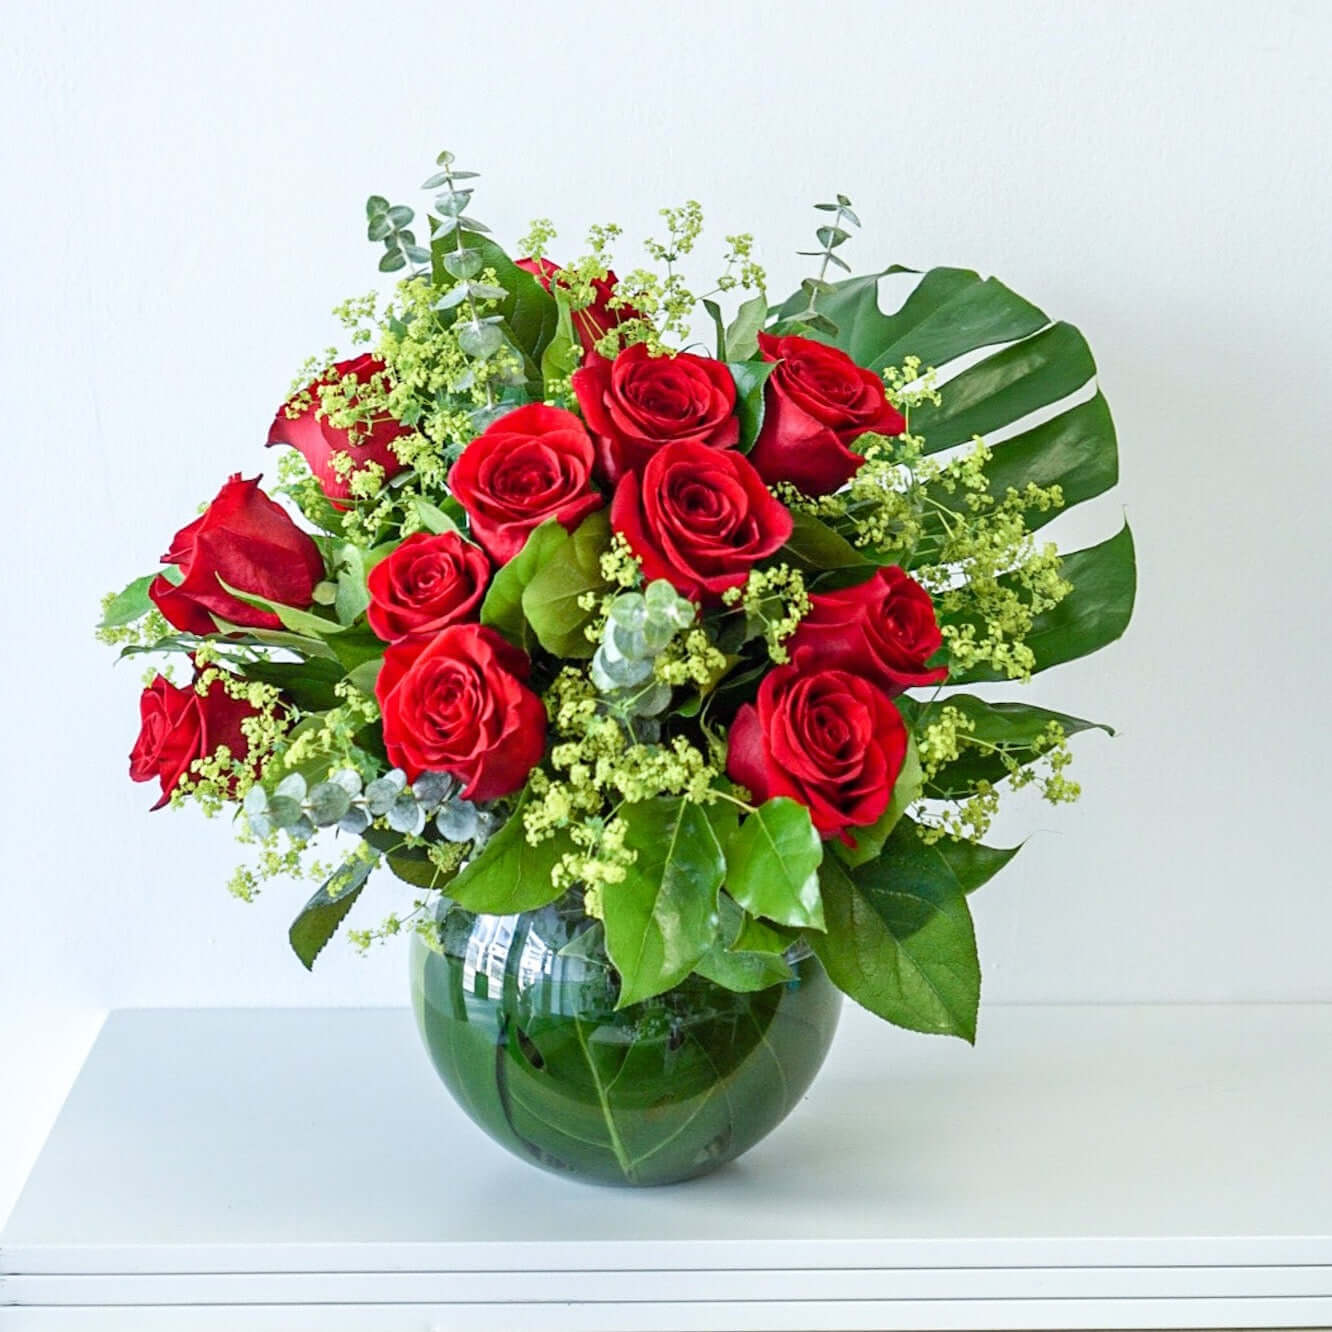 The Red Rose Florist